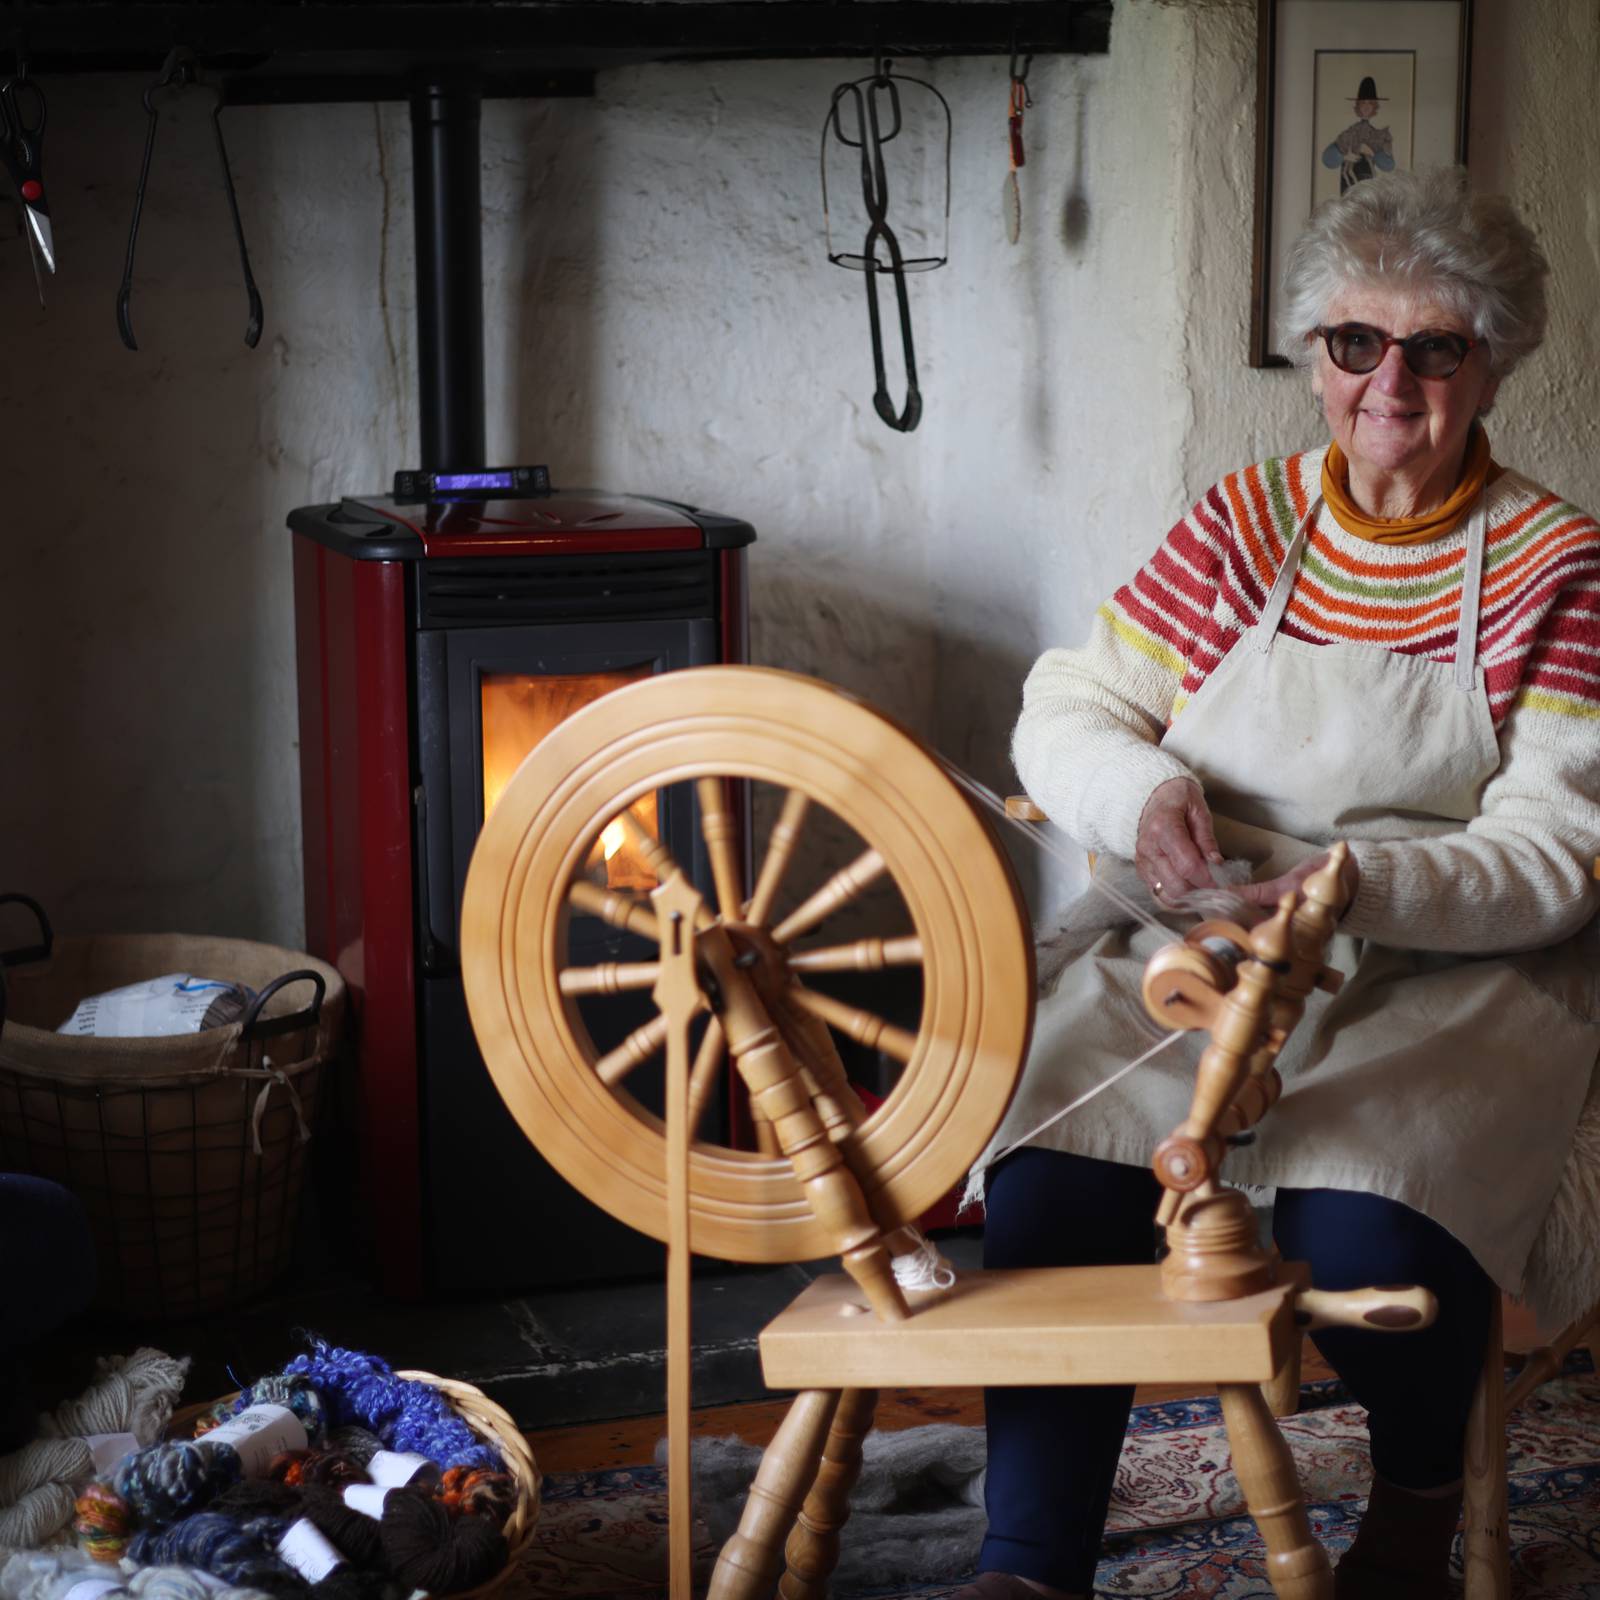 This Woman In Action Is Making Homemade Yarn With A Spinning Wheel